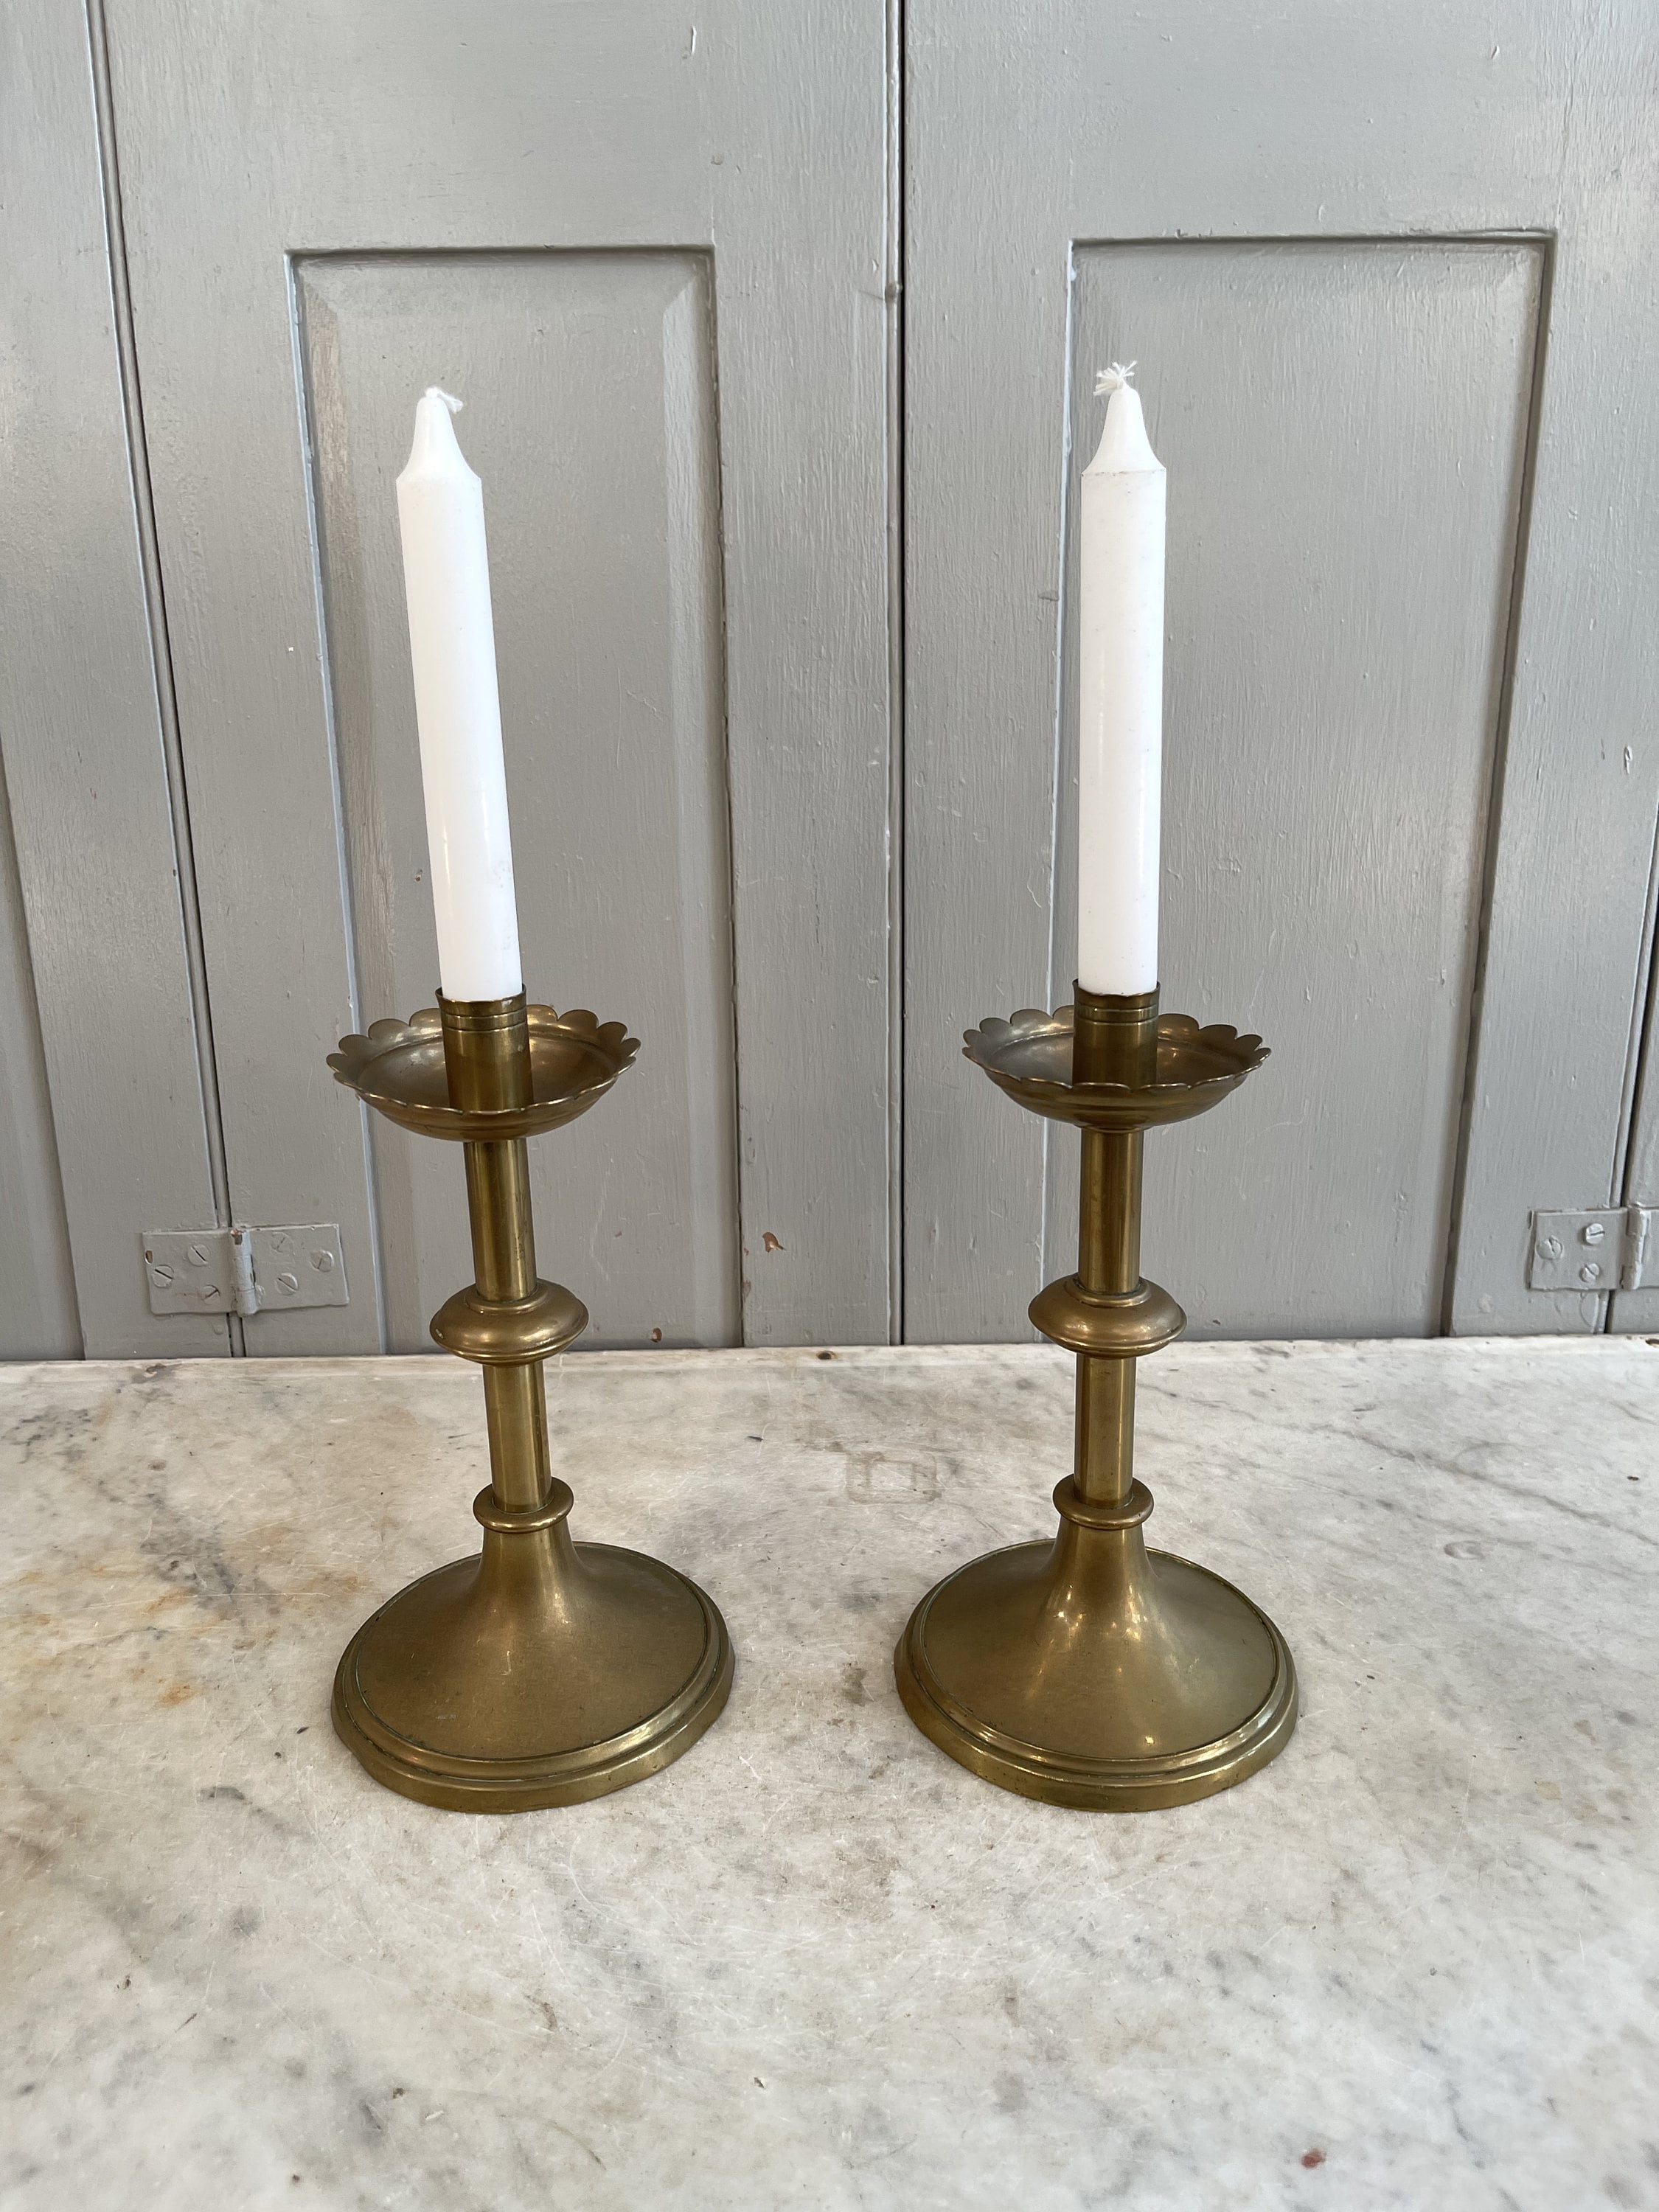 ENGLISH ANTIQUE GOTHIC REVIVAL BRASS ALTAR CANDLESTICK CANDLE HOLDER PUGIN  STYLE